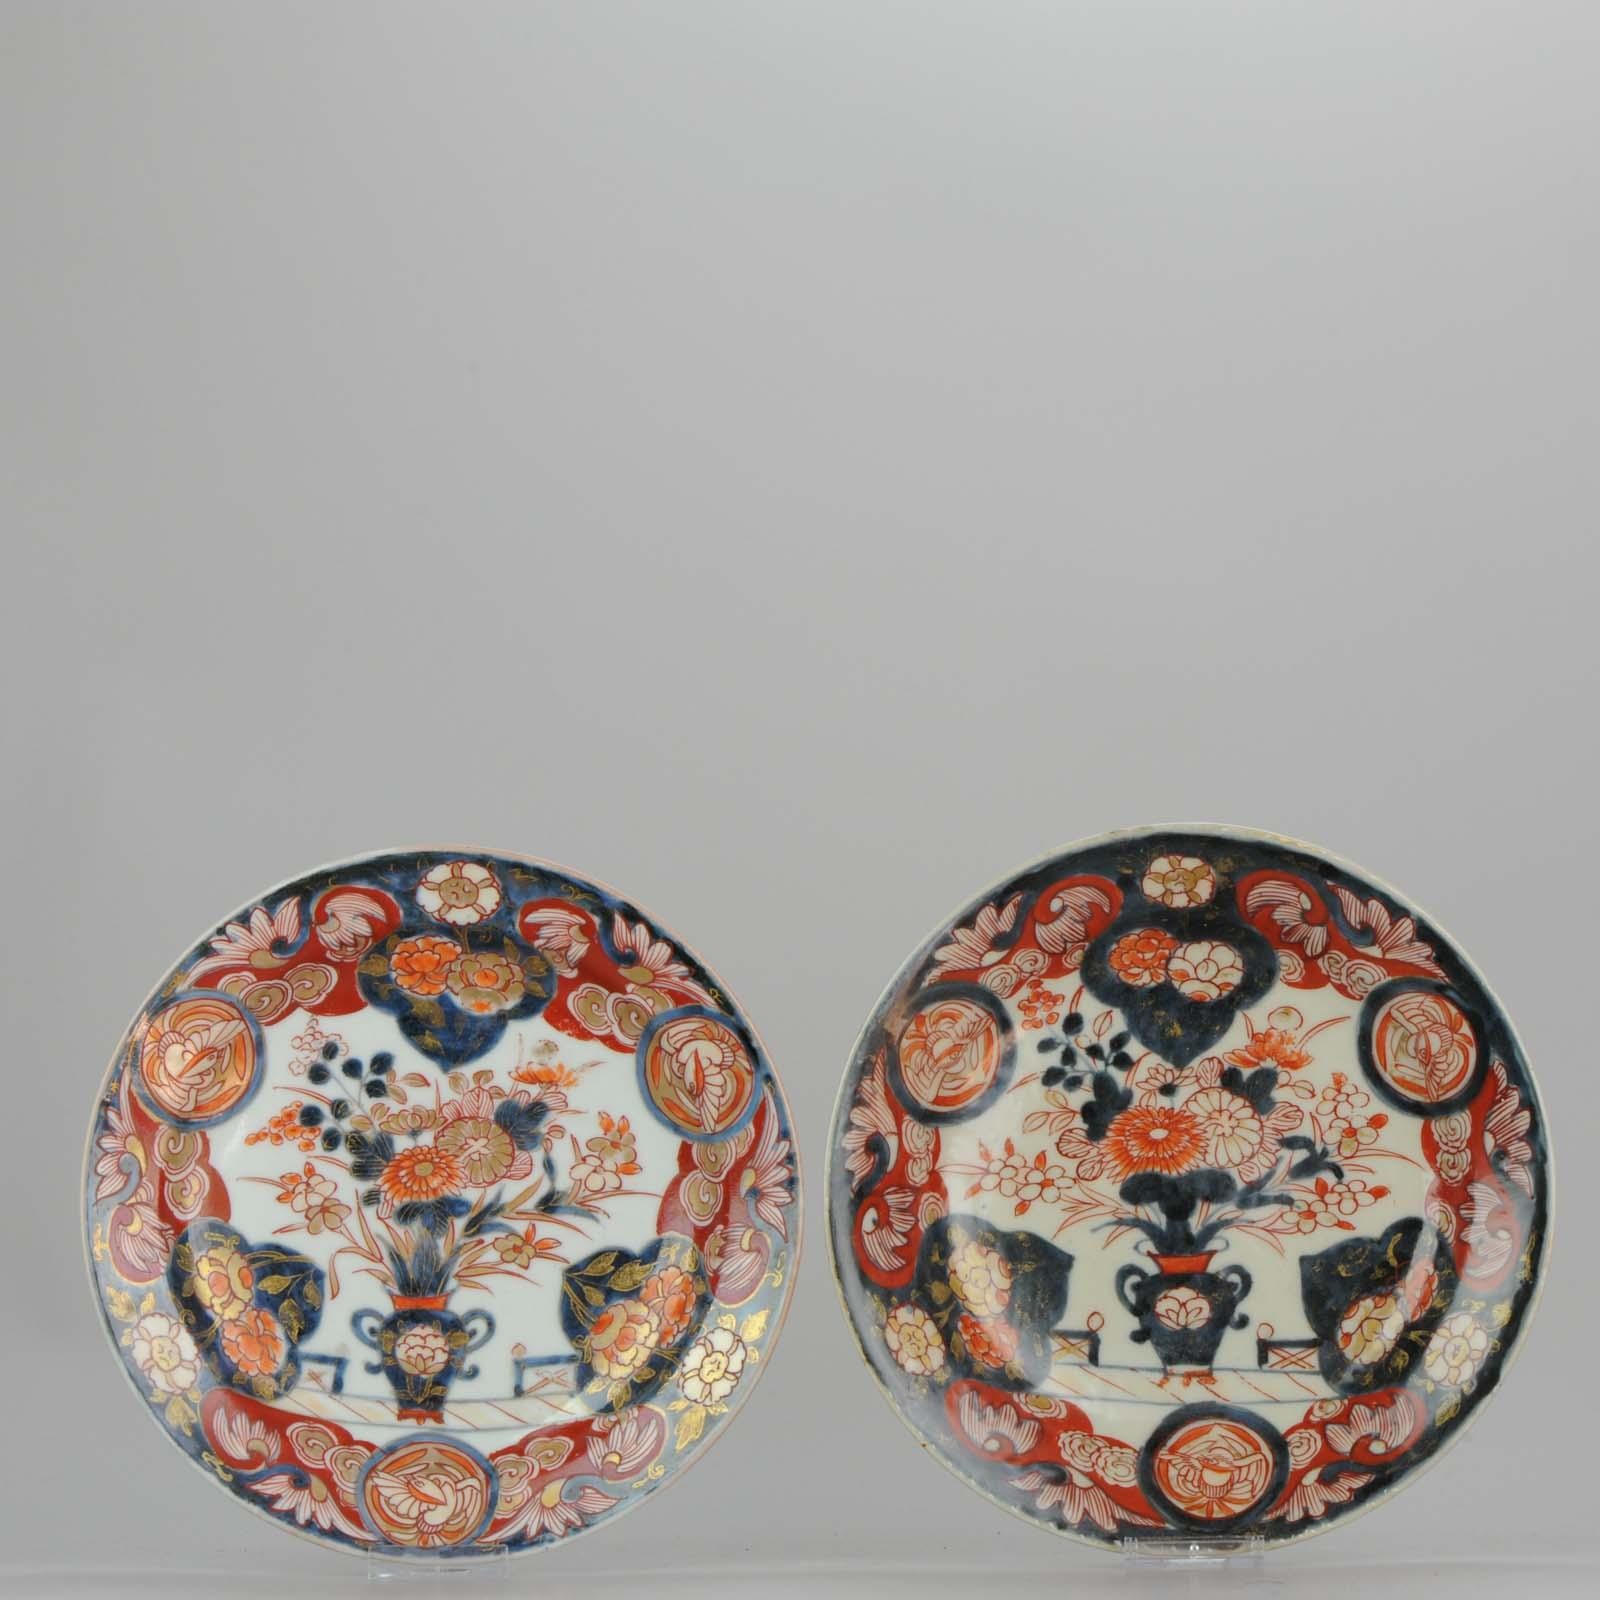 A very nice example of a small early Japanese Arita porcelain plate set. Great decoration. Pictured in 